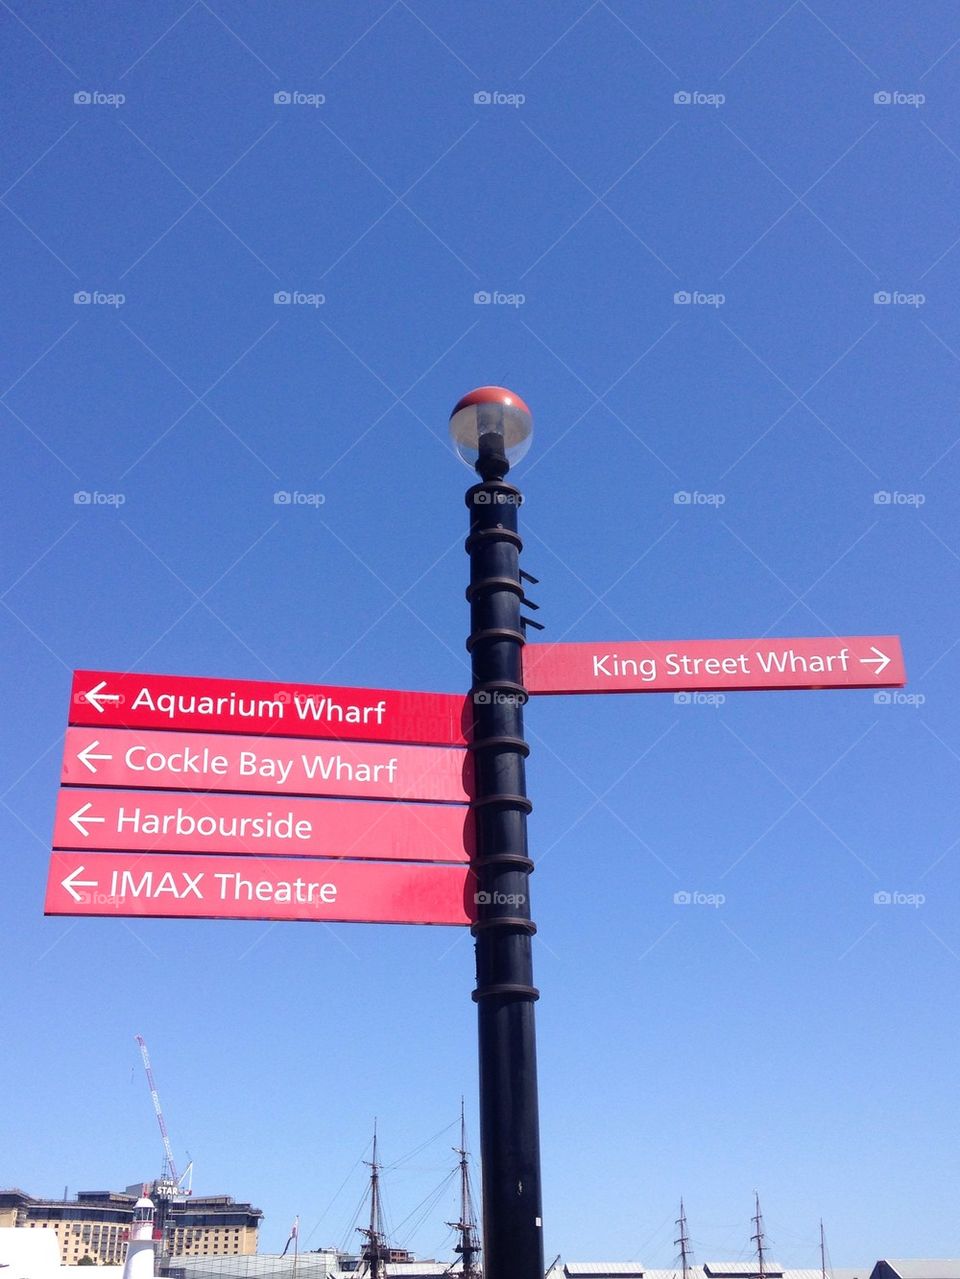 Signs direction